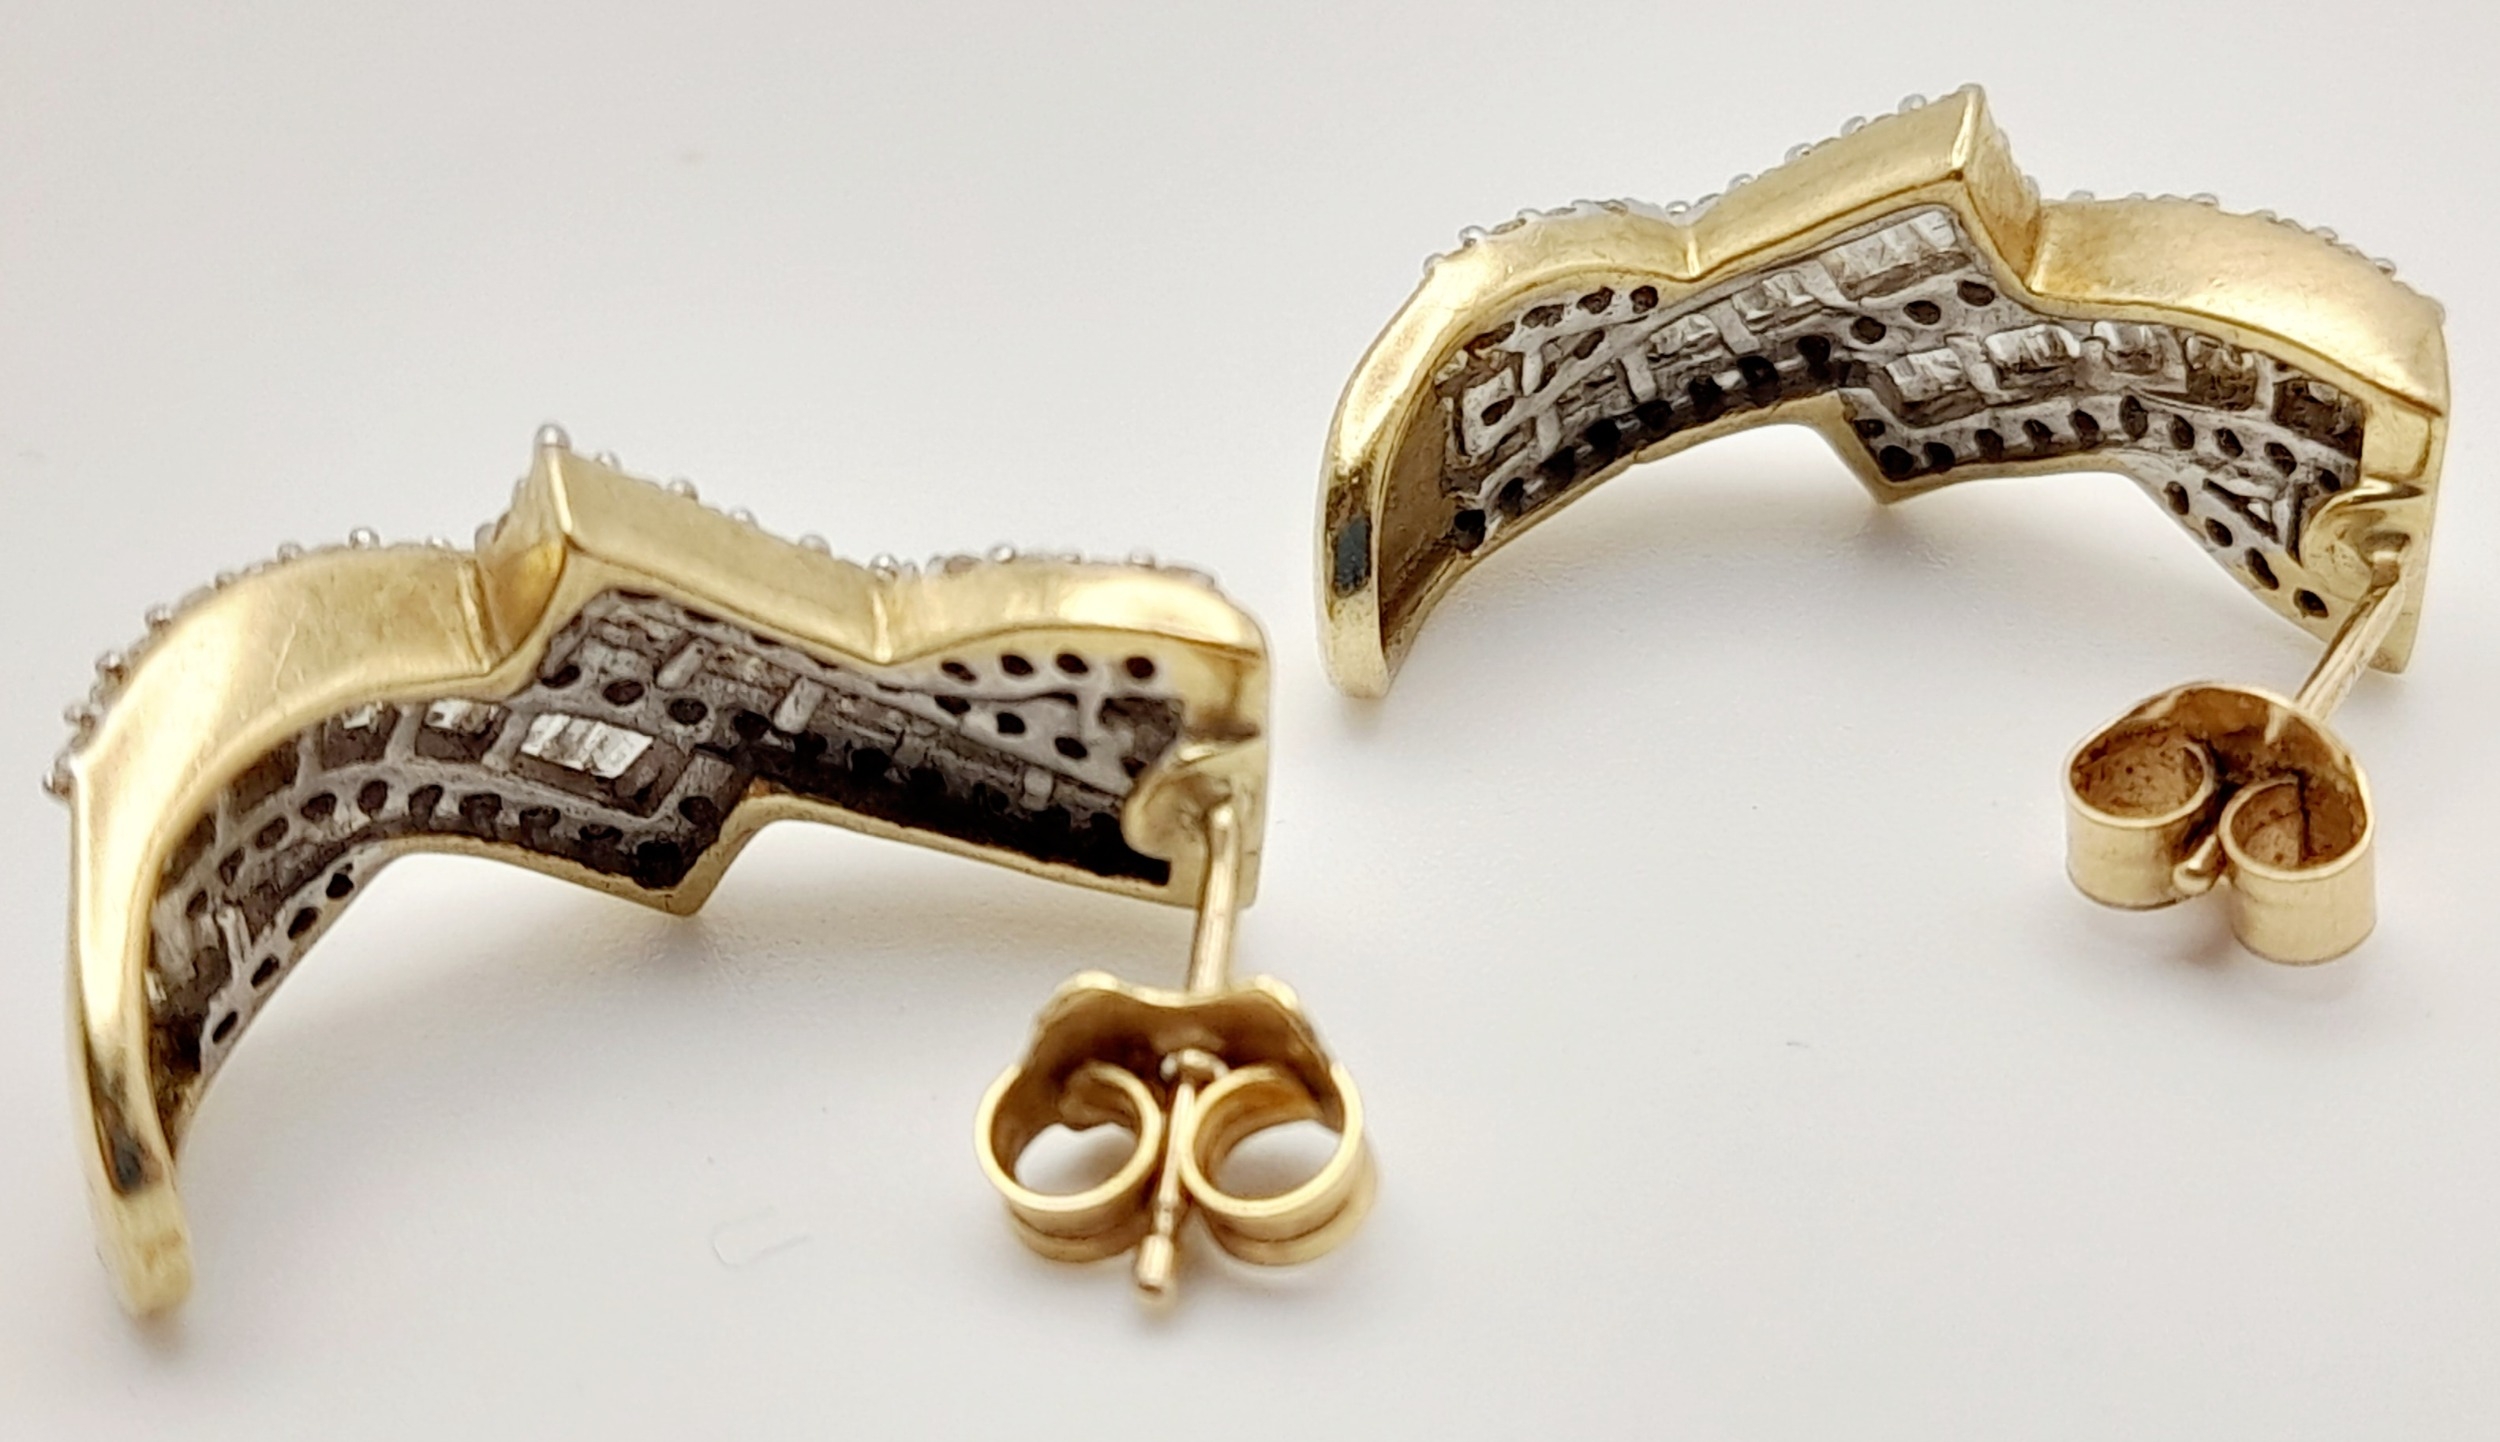 A Pair of 9K Yellow Gold and Diamond Earrings. Round and baguette cut diamonds. 2.5cm drop. 5.1g - Image 3 of 5